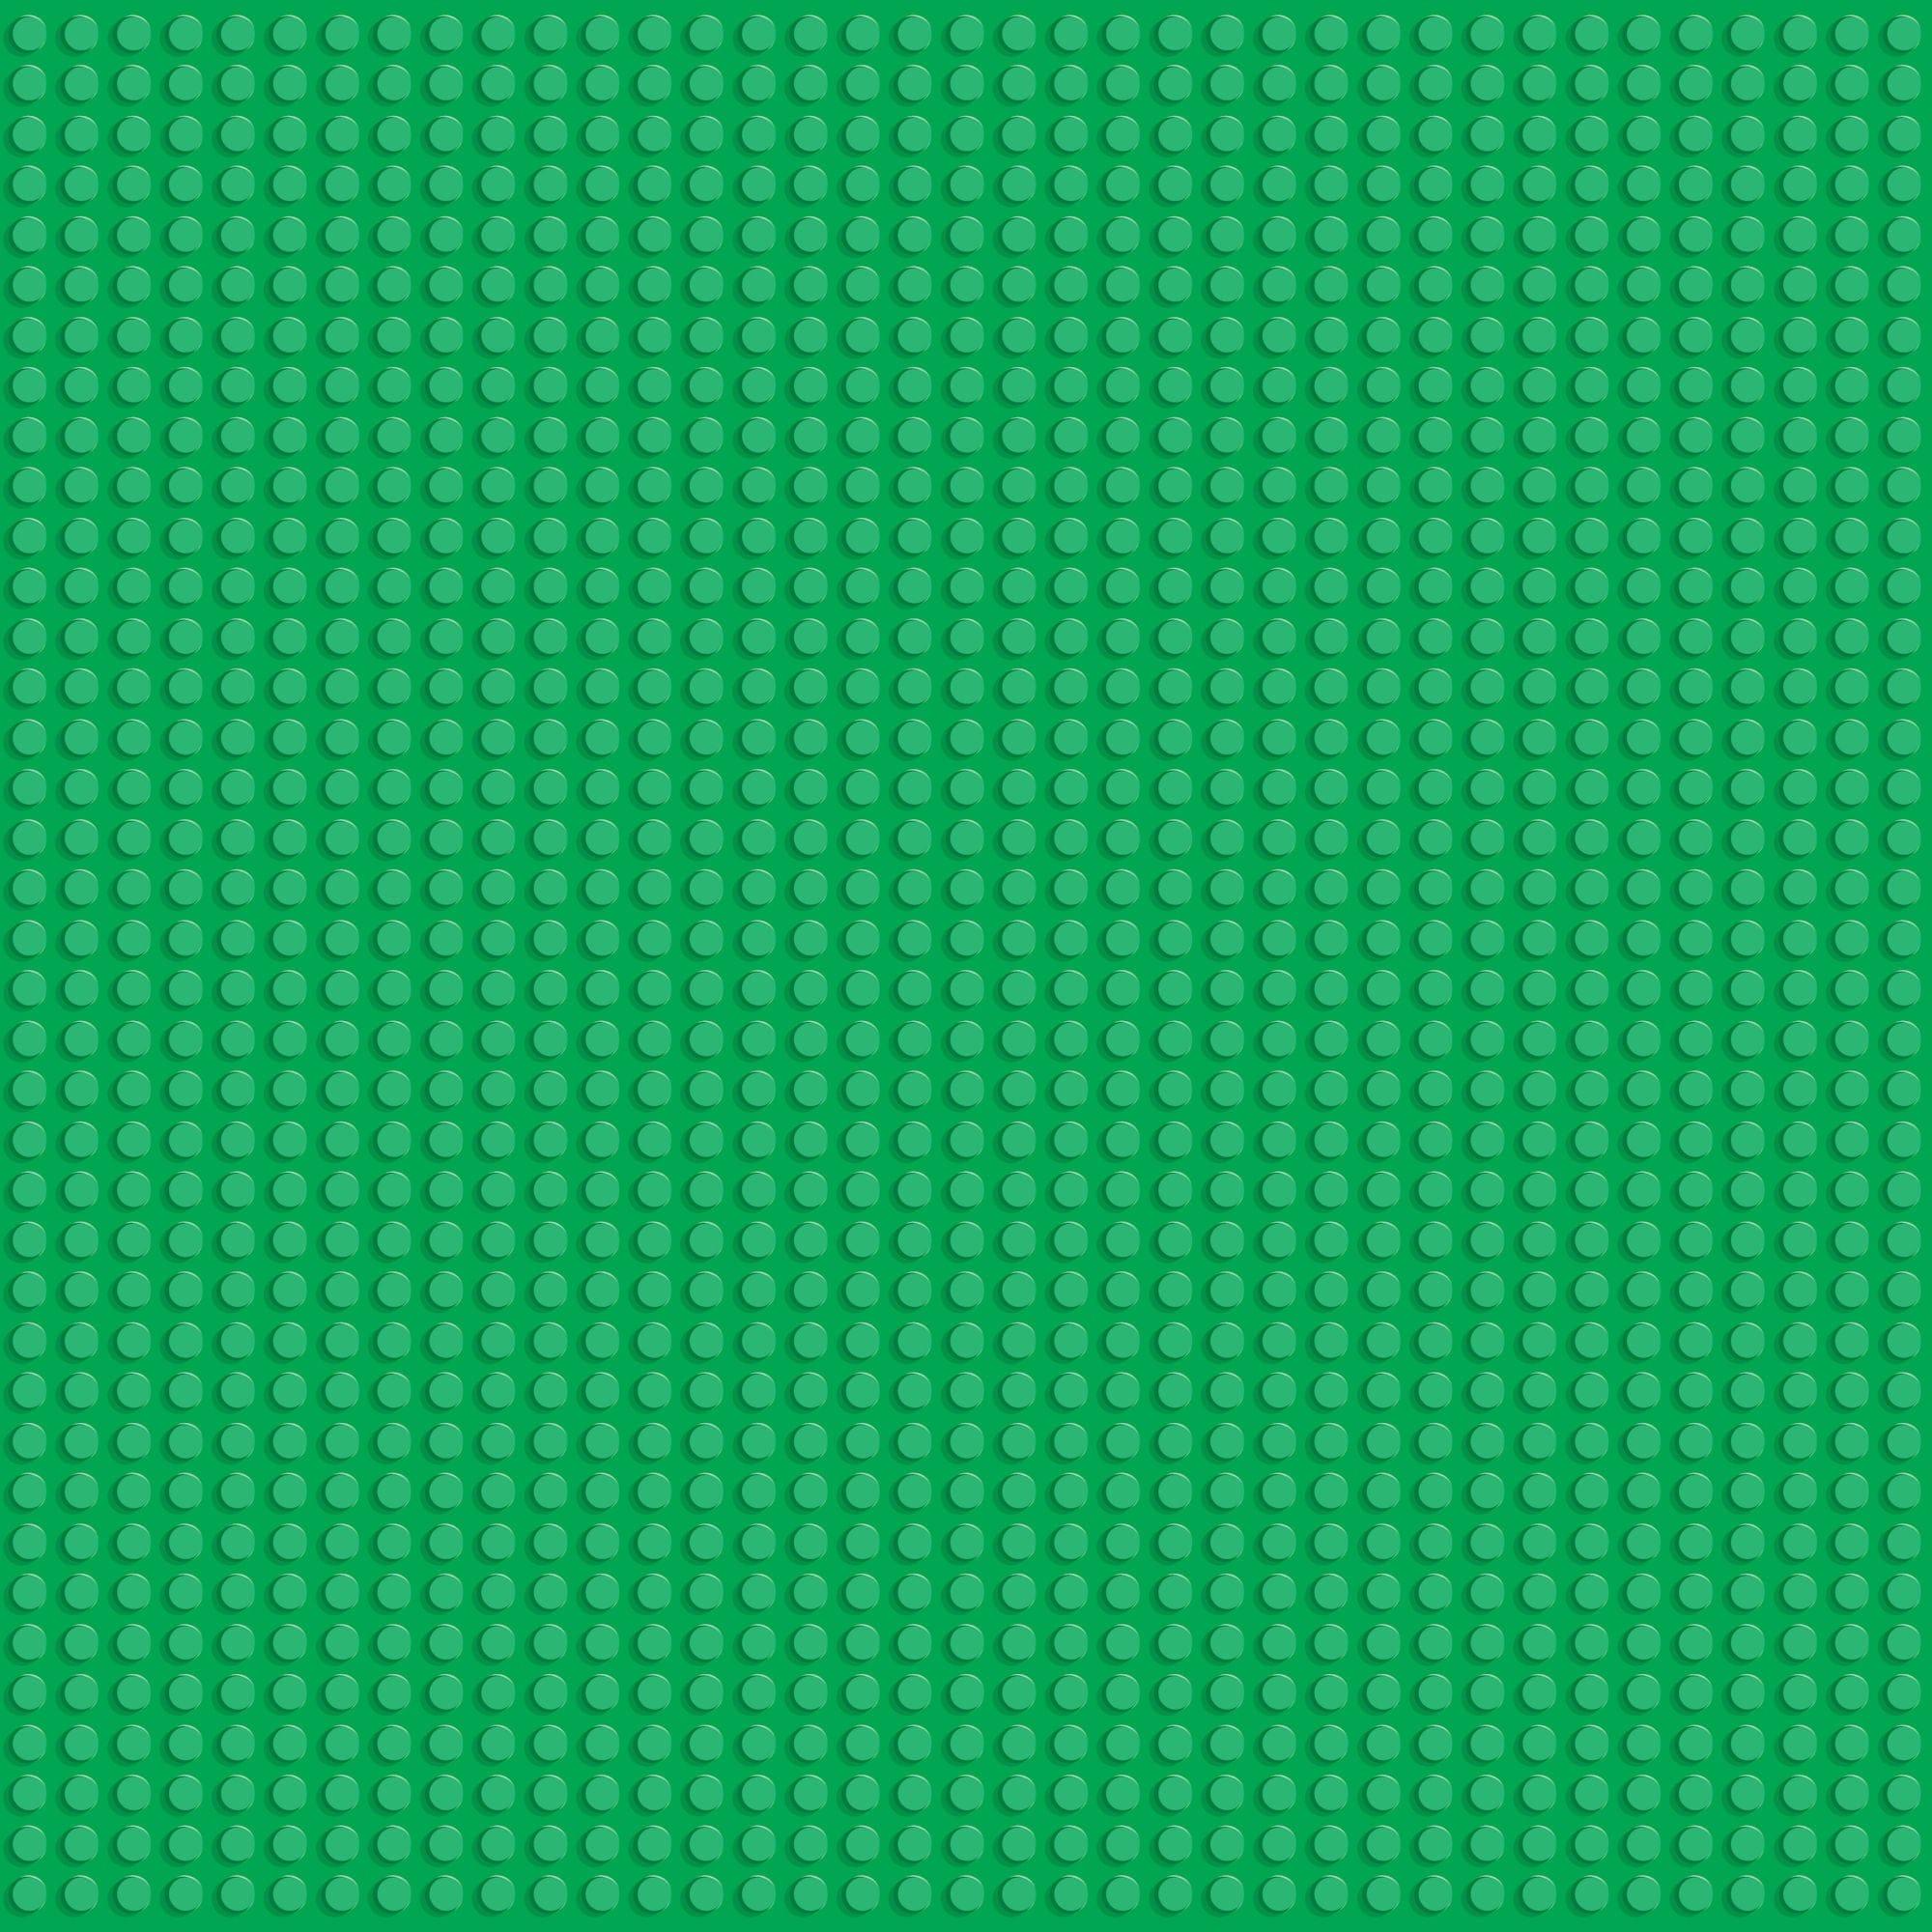 The Building Blocks Collection Blue & Green Blocks 12 x 12 Double-Sided Scrapbook Paper by SSC Designs - Scrapbook Supply Companies